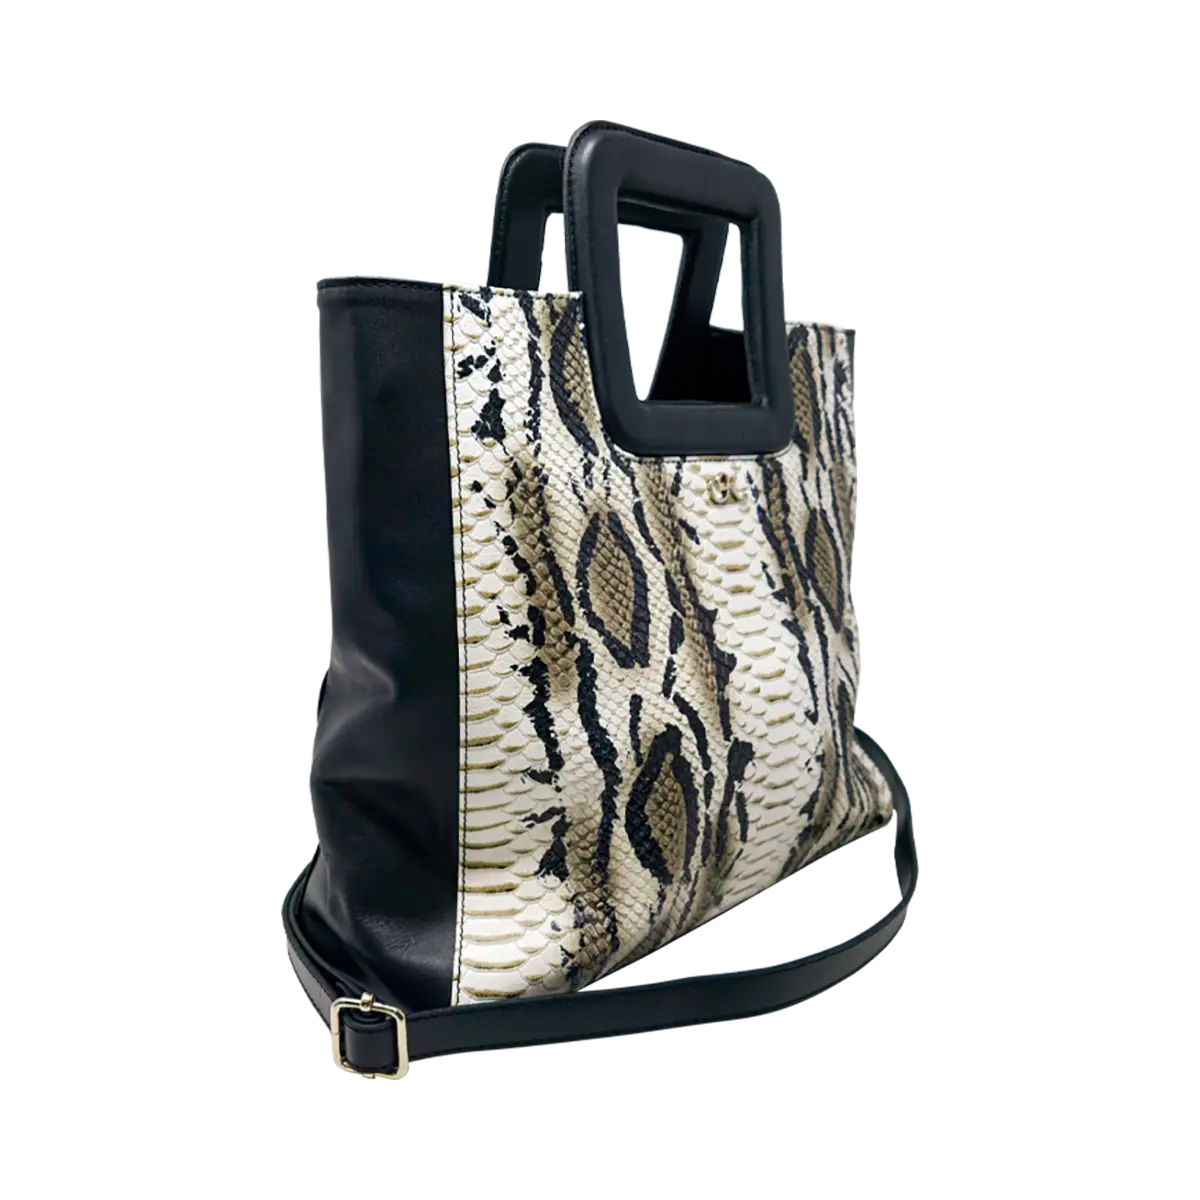 large black white print leather print handbag with a square handle. Accessory for women in San Diego, CA.